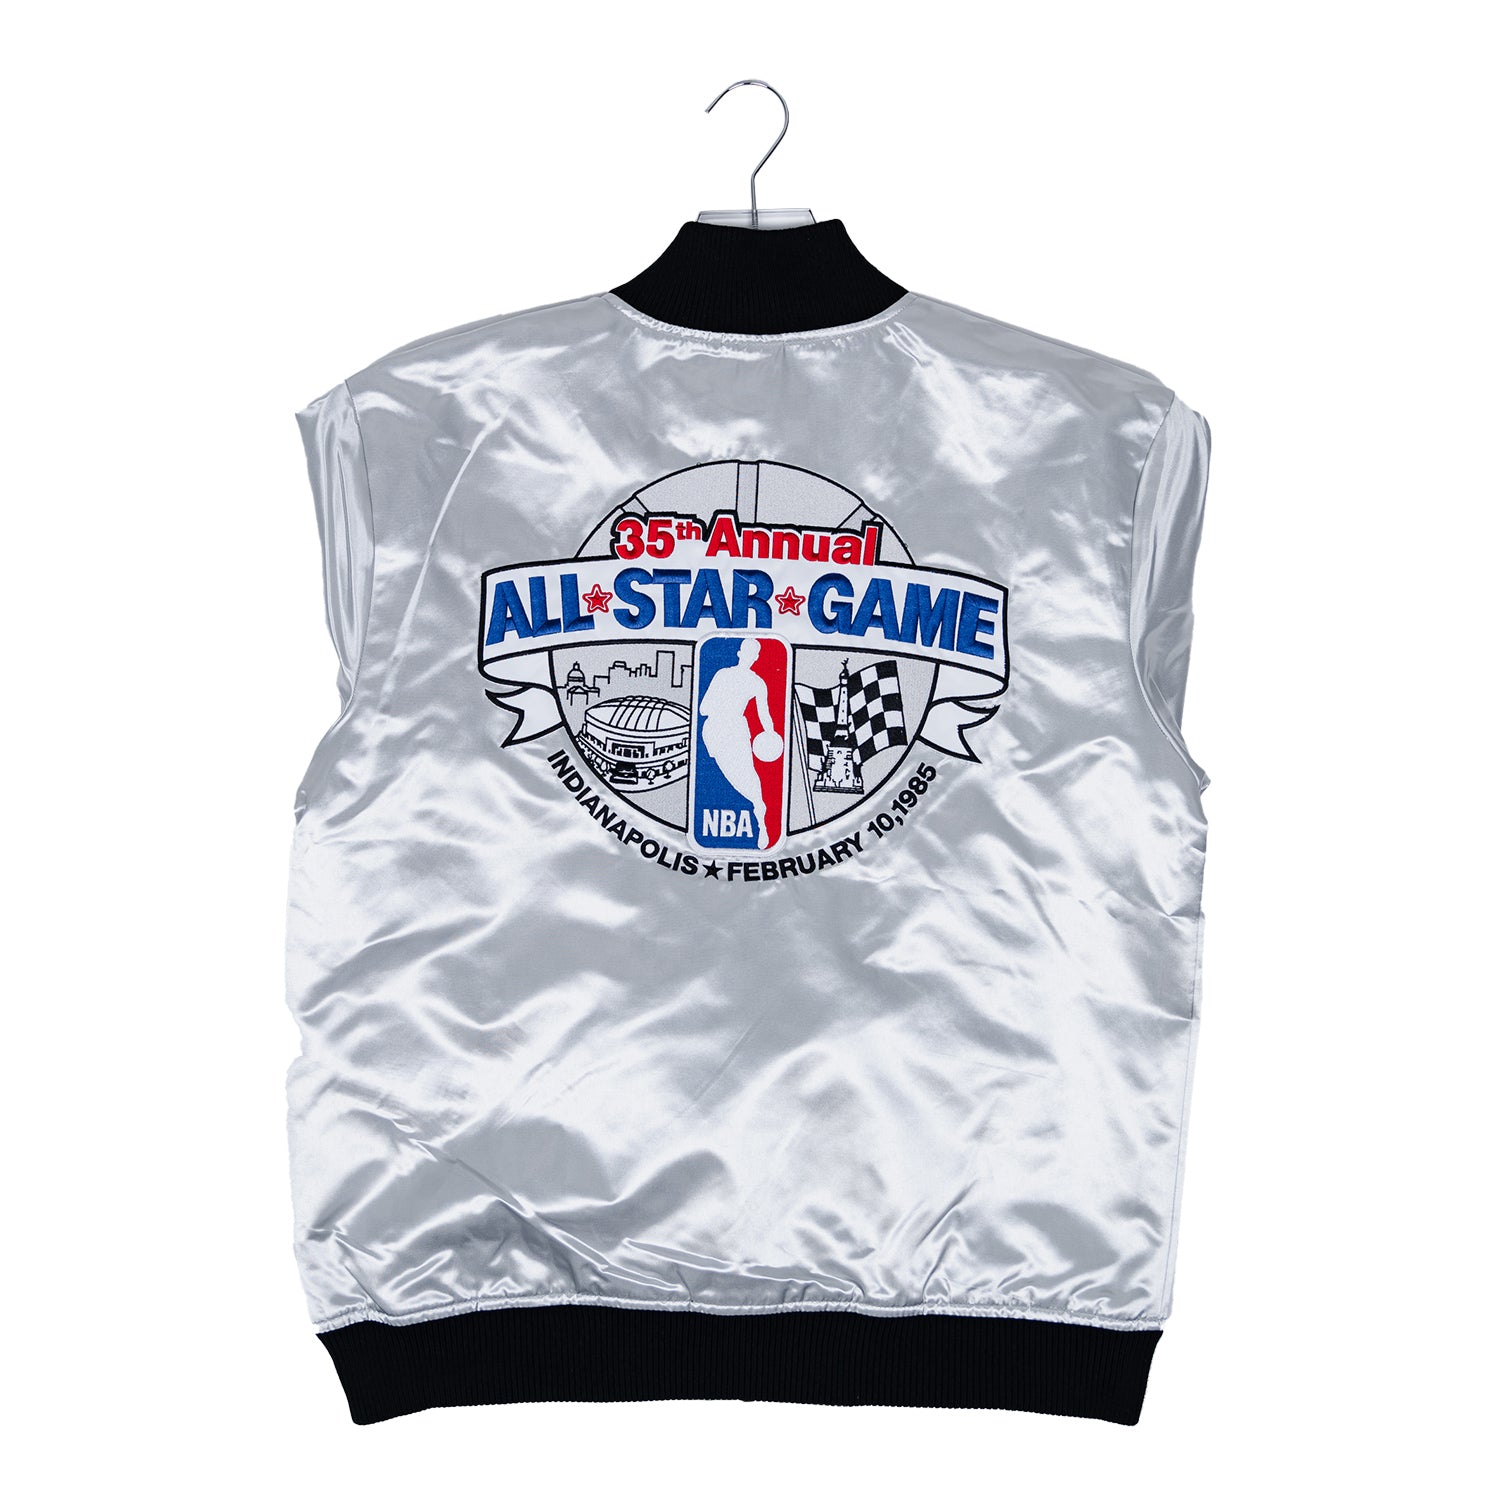 NBA All-Star Game 2020  How to get jerseys, sweatshirts, t-shirts